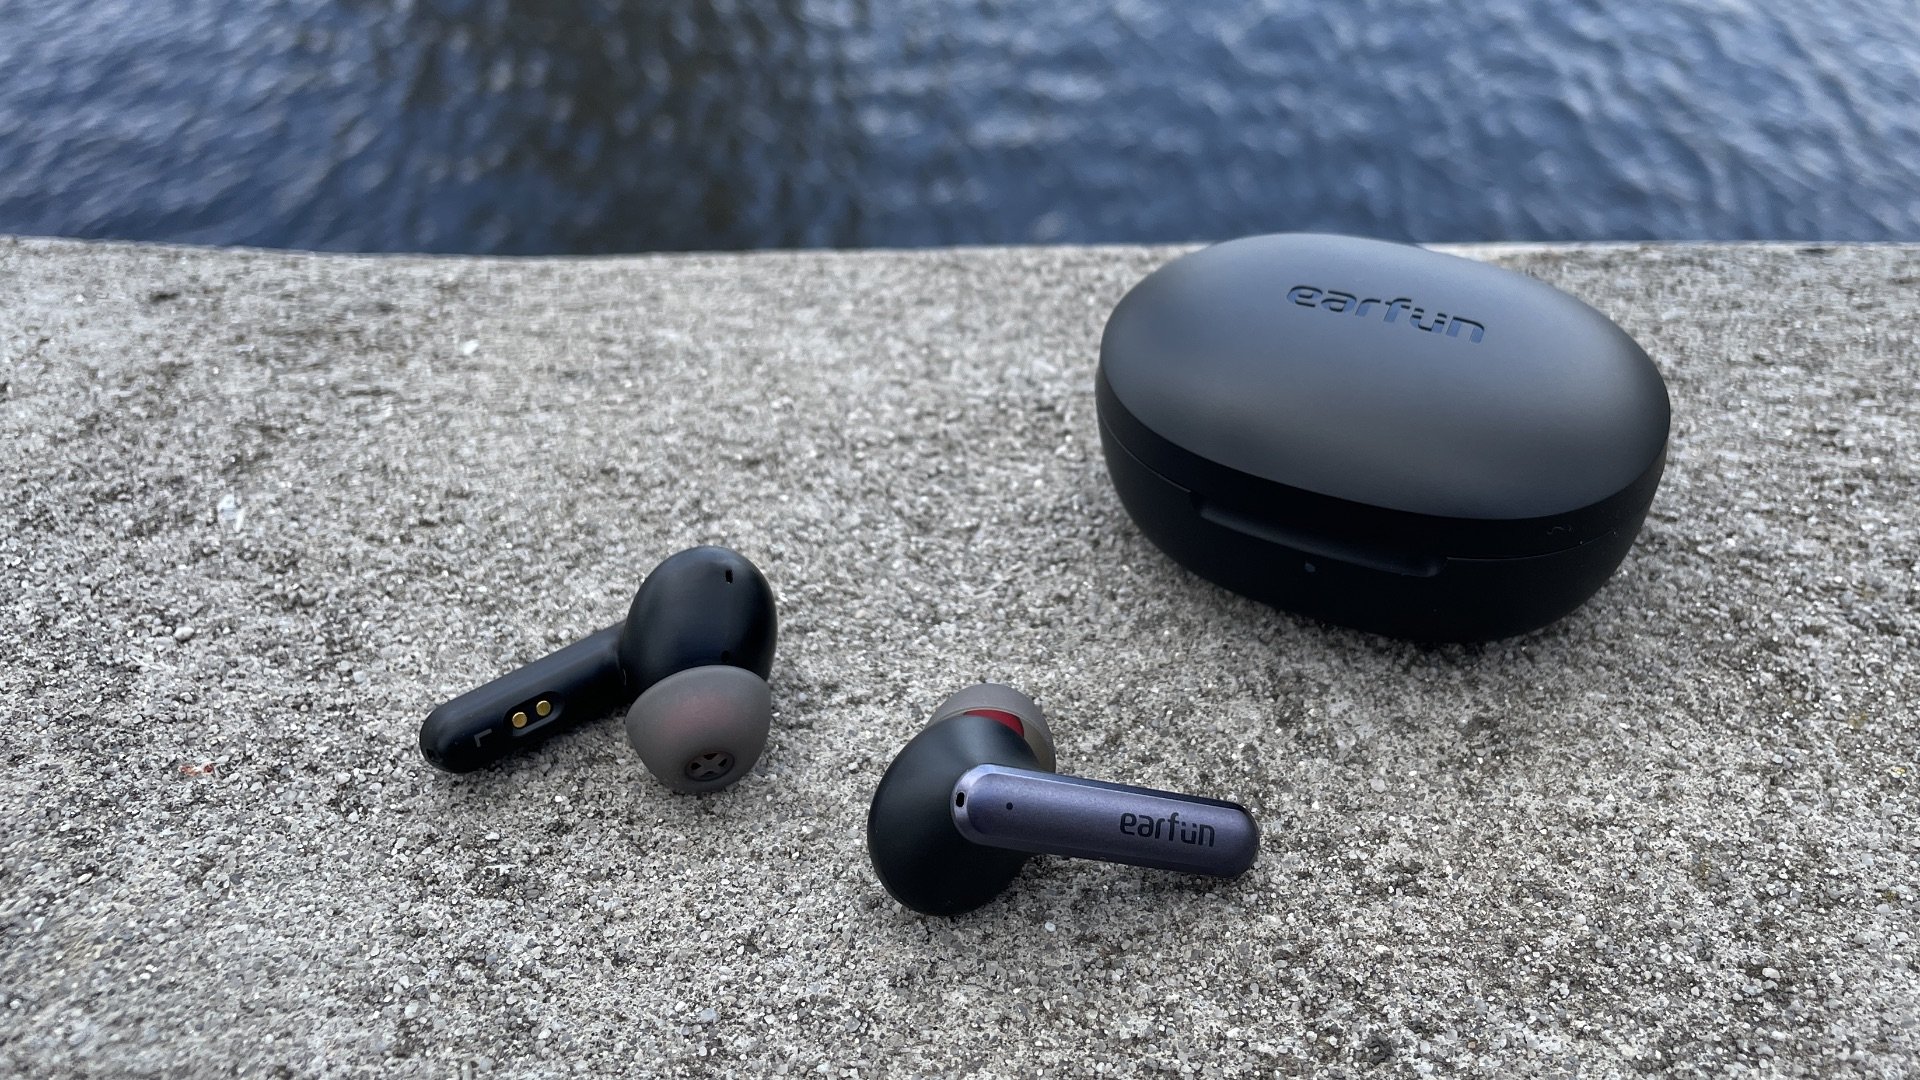 Extreem belangrijk Appartement laag Earfun Air S review: Great multipoint earbuds on a budget